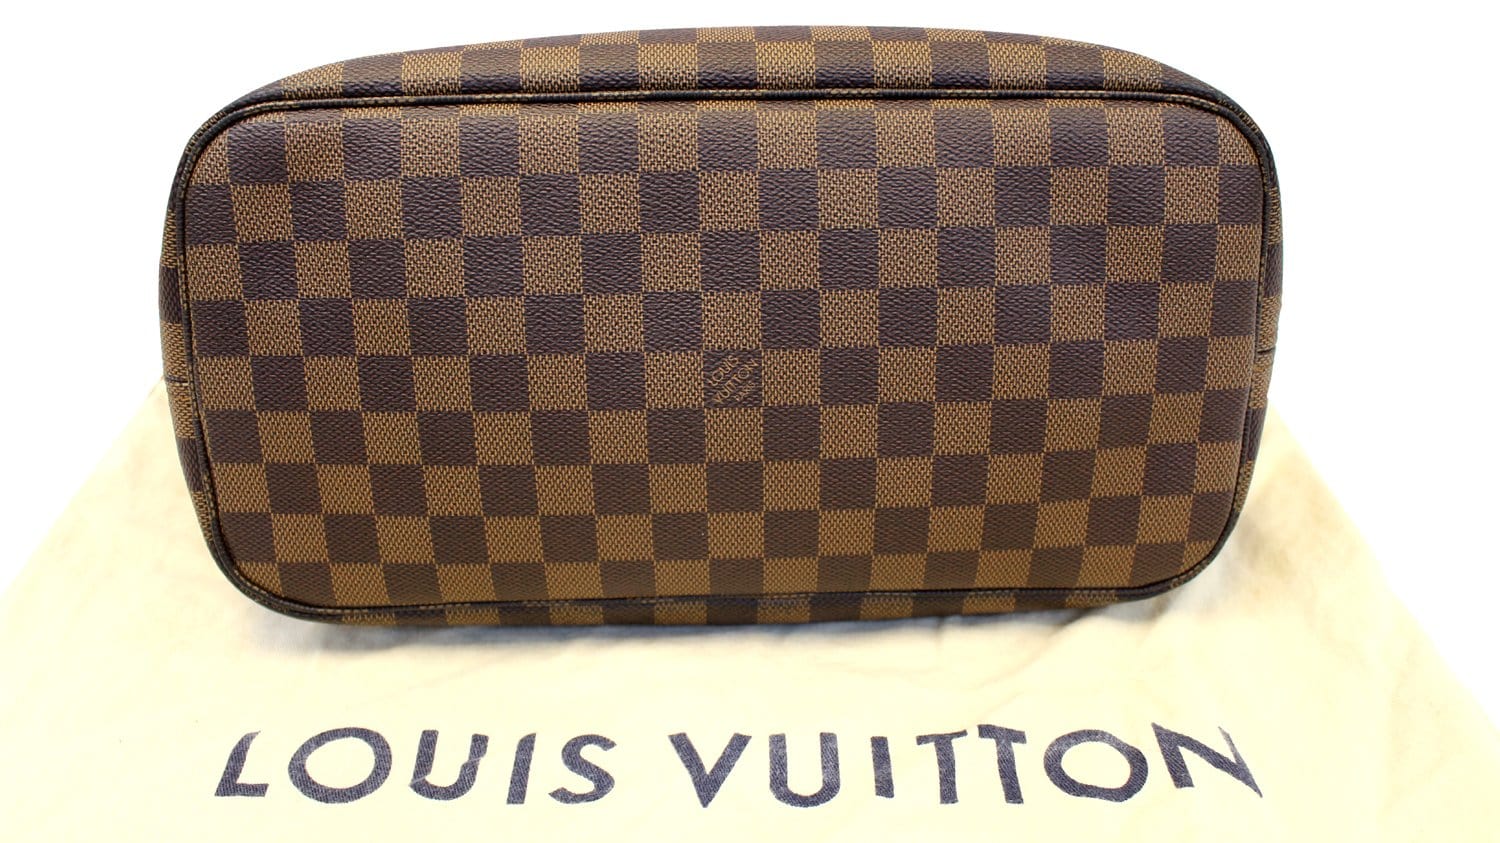 LOUIS VUITTON Bague Damier Perfore Ring M64241｜Product  Code：2107600706603｜BRAND OFF Online Store